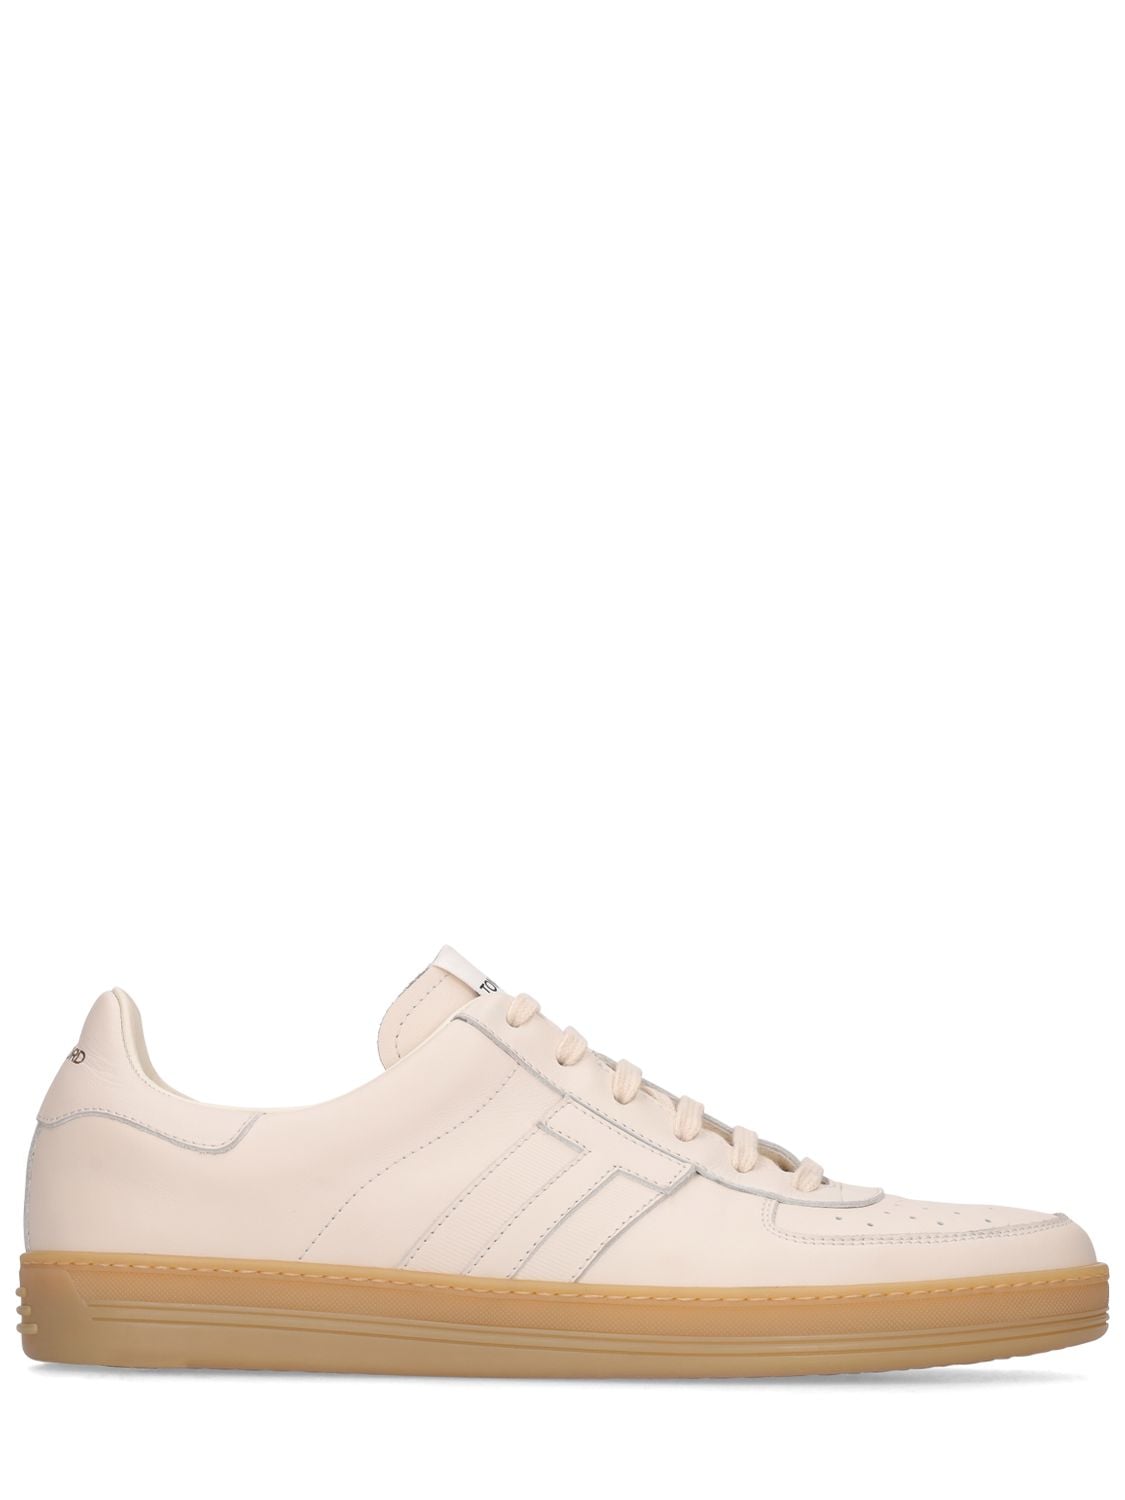 TOM FORD SMOOTH LEATHER LOW TOP trainers